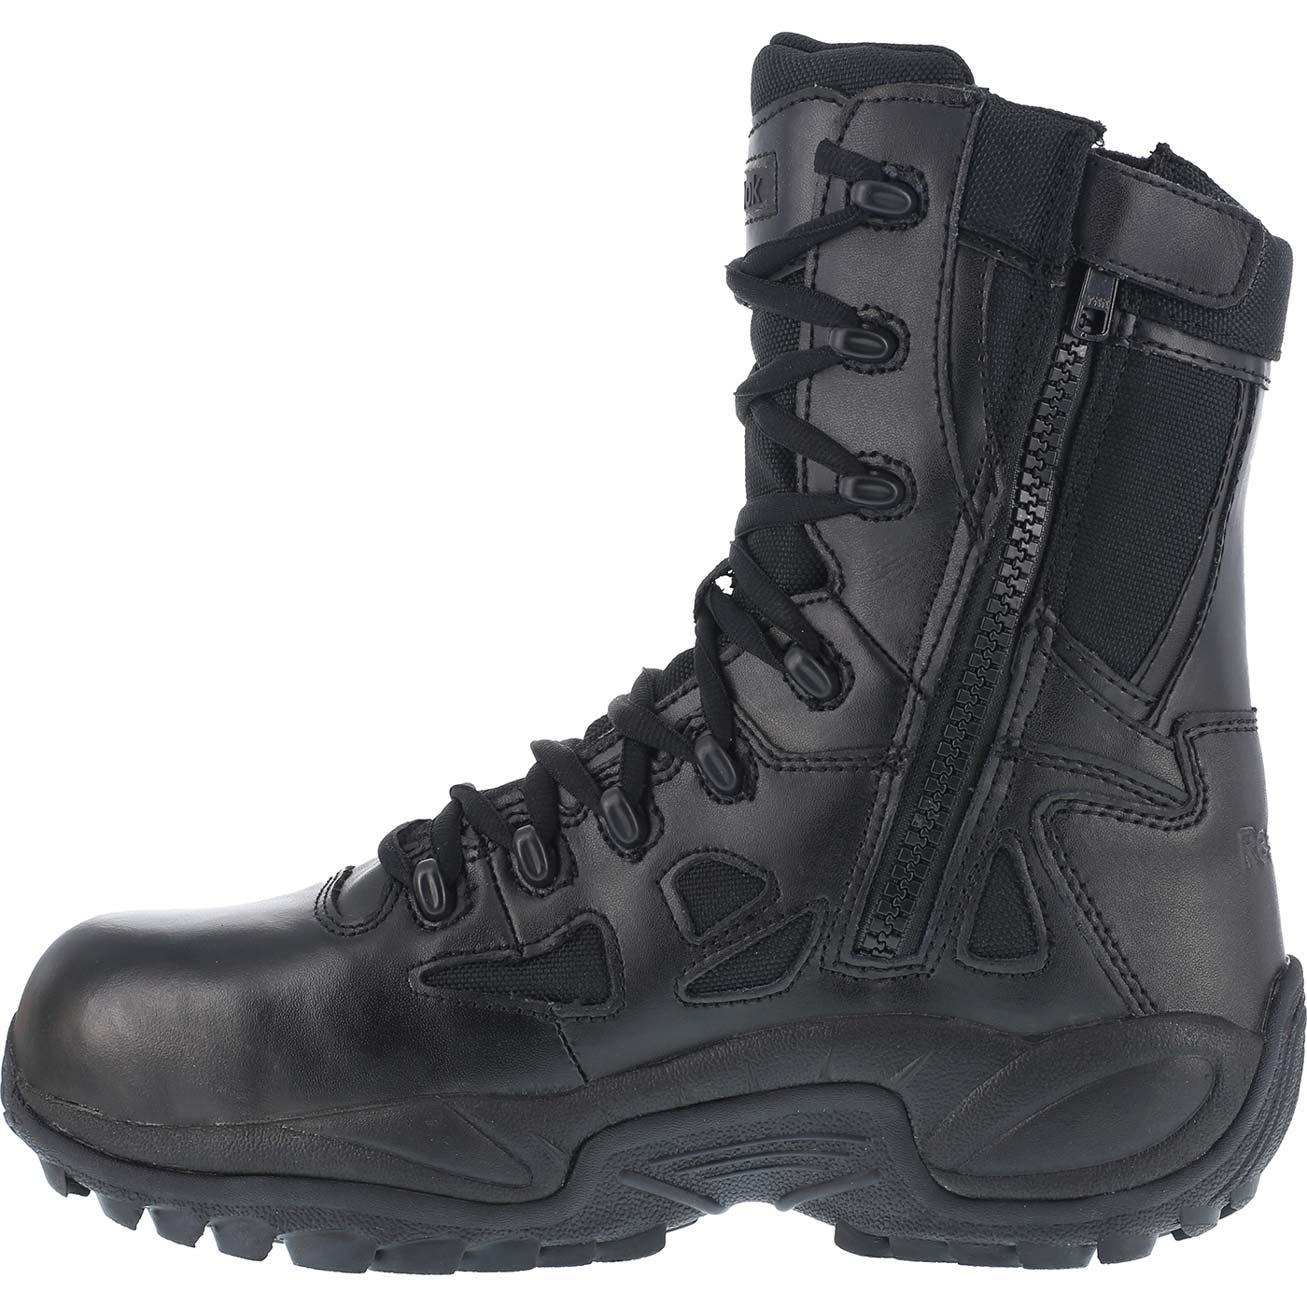 Reebok Stealth - Composite Toe Tactical Black Military Boot, #RB8874